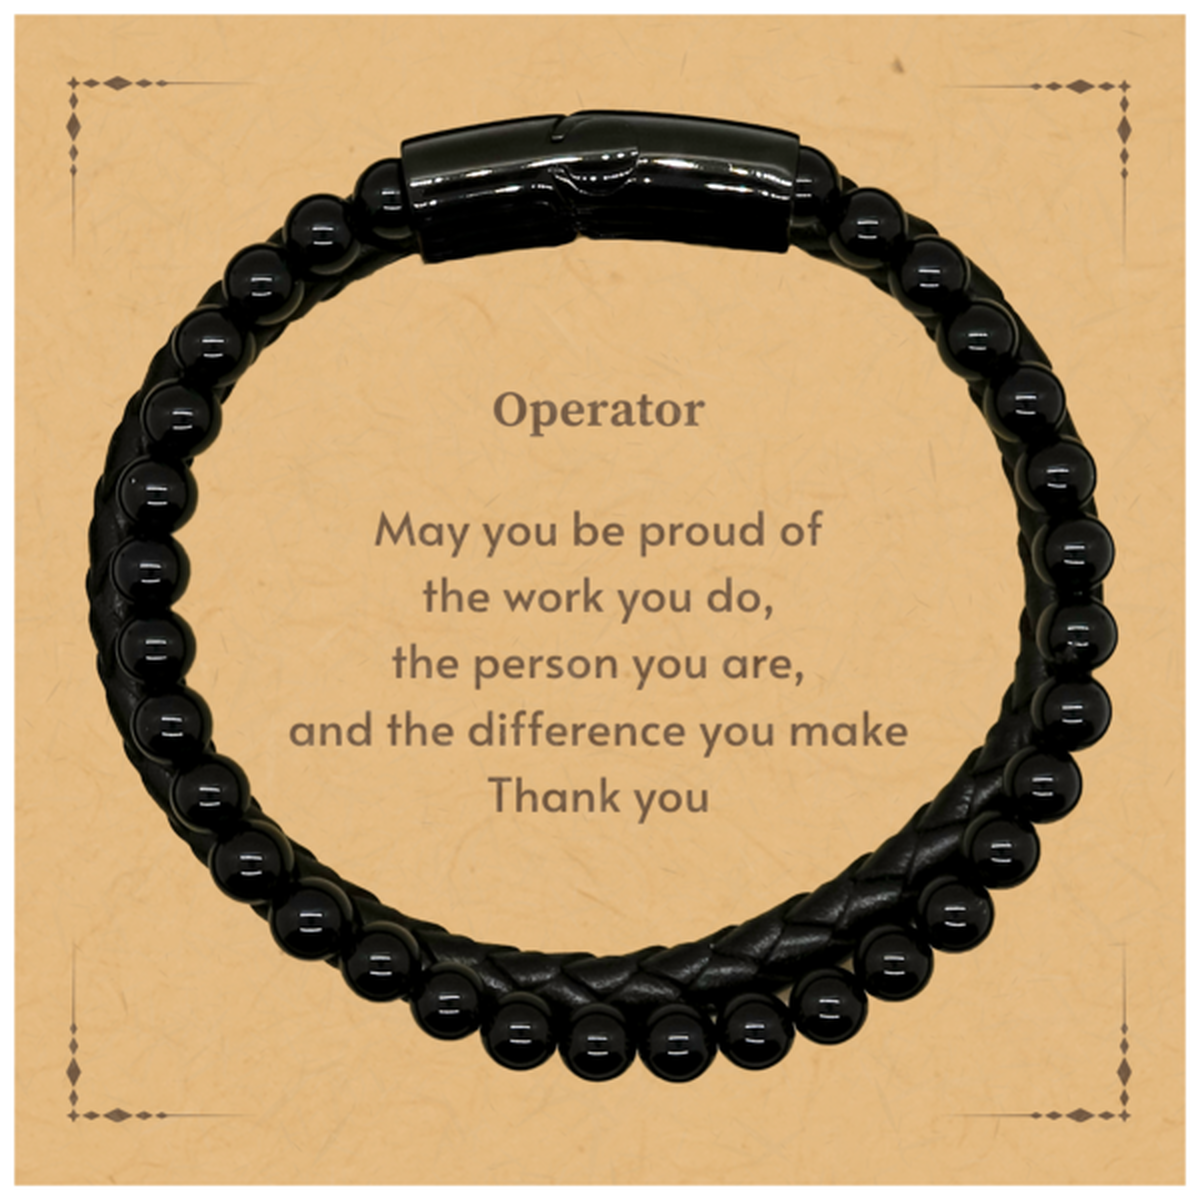 Heartwarming Stone Leather Bracelets Retirement Coworkers Gifts for Operator, Operator May You be proud of the work you do, the person you are Gifts for Boss Men Women Friends